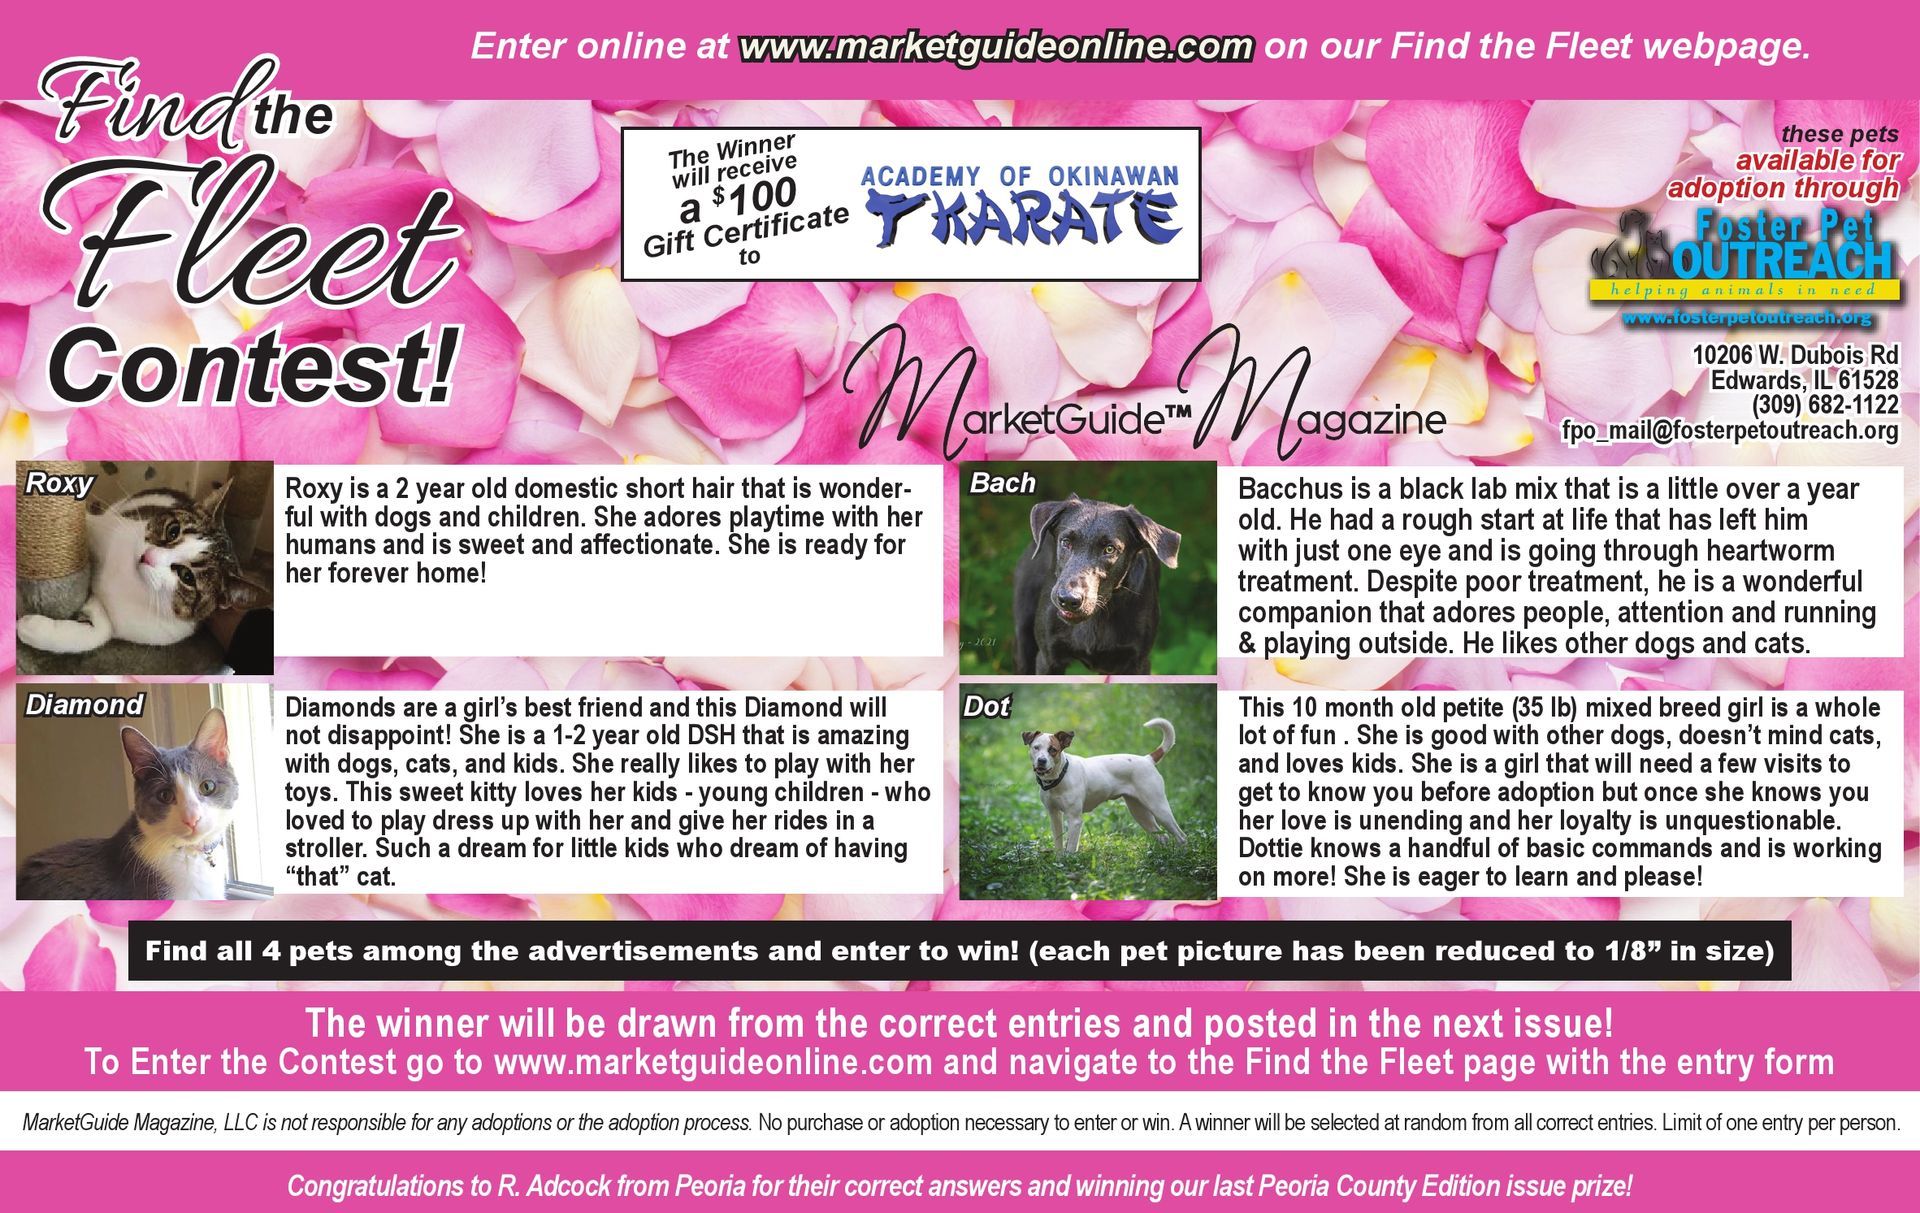 MarketGuide Magazine Find the Fleet Contest 1 winner foster pet outreach adoption of dogs and cats